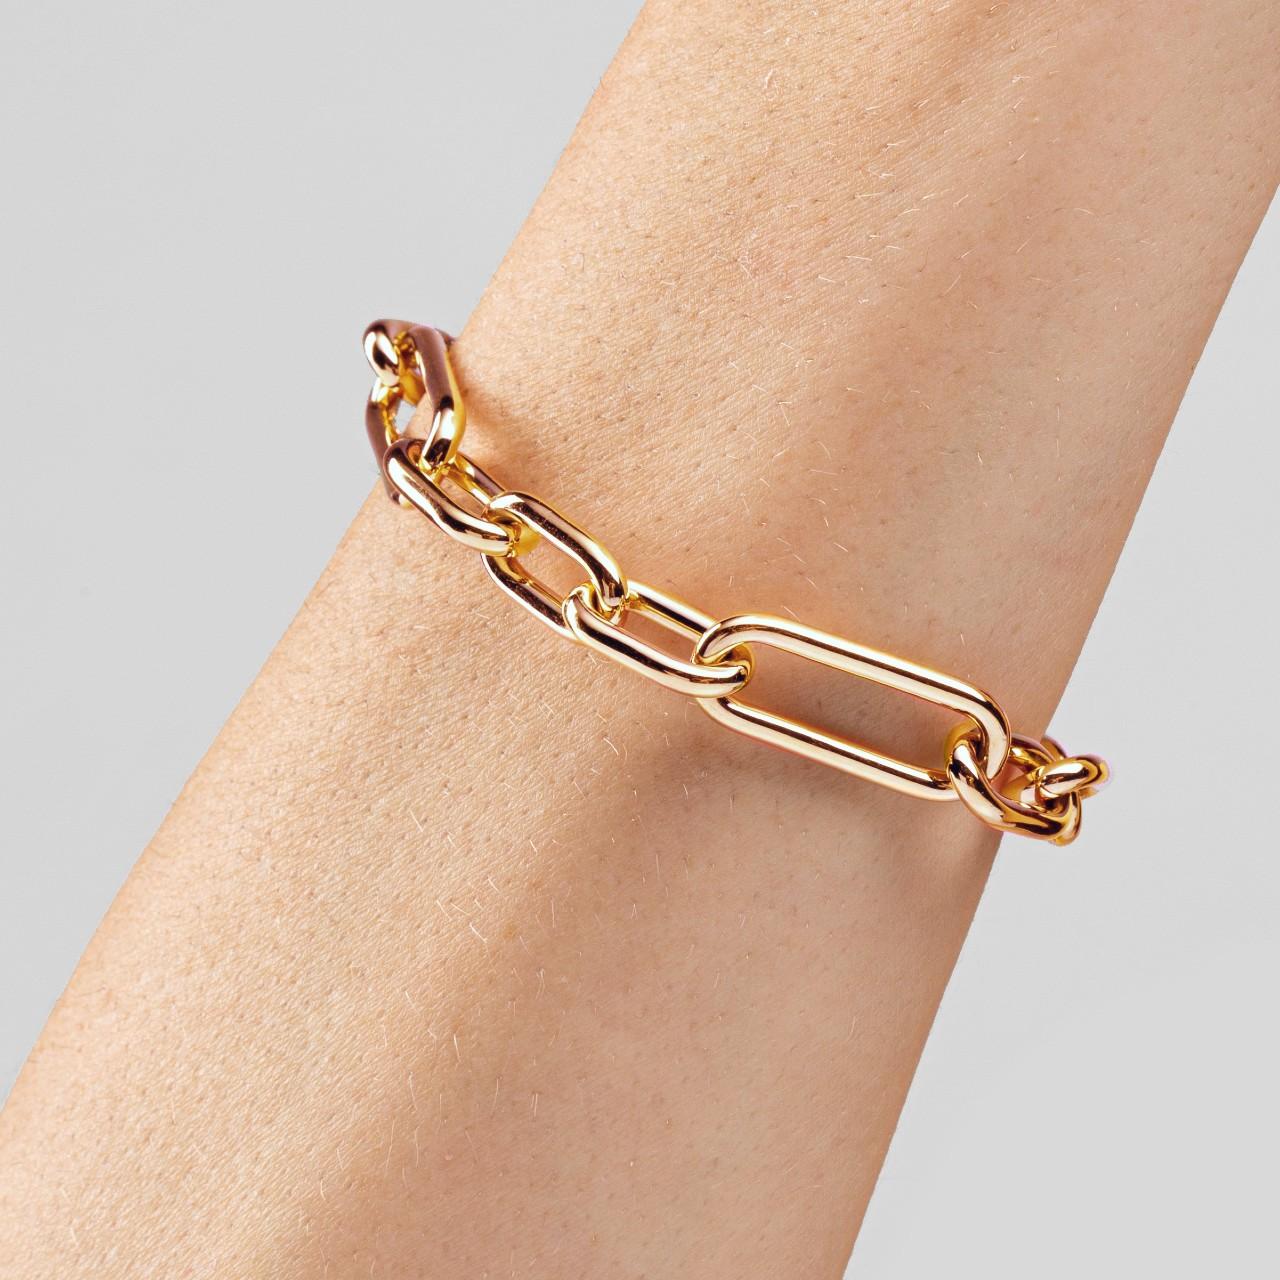 Alex Jona design collection, hand crafted in Italy, 18 karat rose gold chain bracelet.
Dimension: L 8 in X W 0.12 in - L 20.5 cm X W 3.06 mm
Weight 17.3 gr

Alex Jona jewels stand out, not only for their special design and for the excellent quality